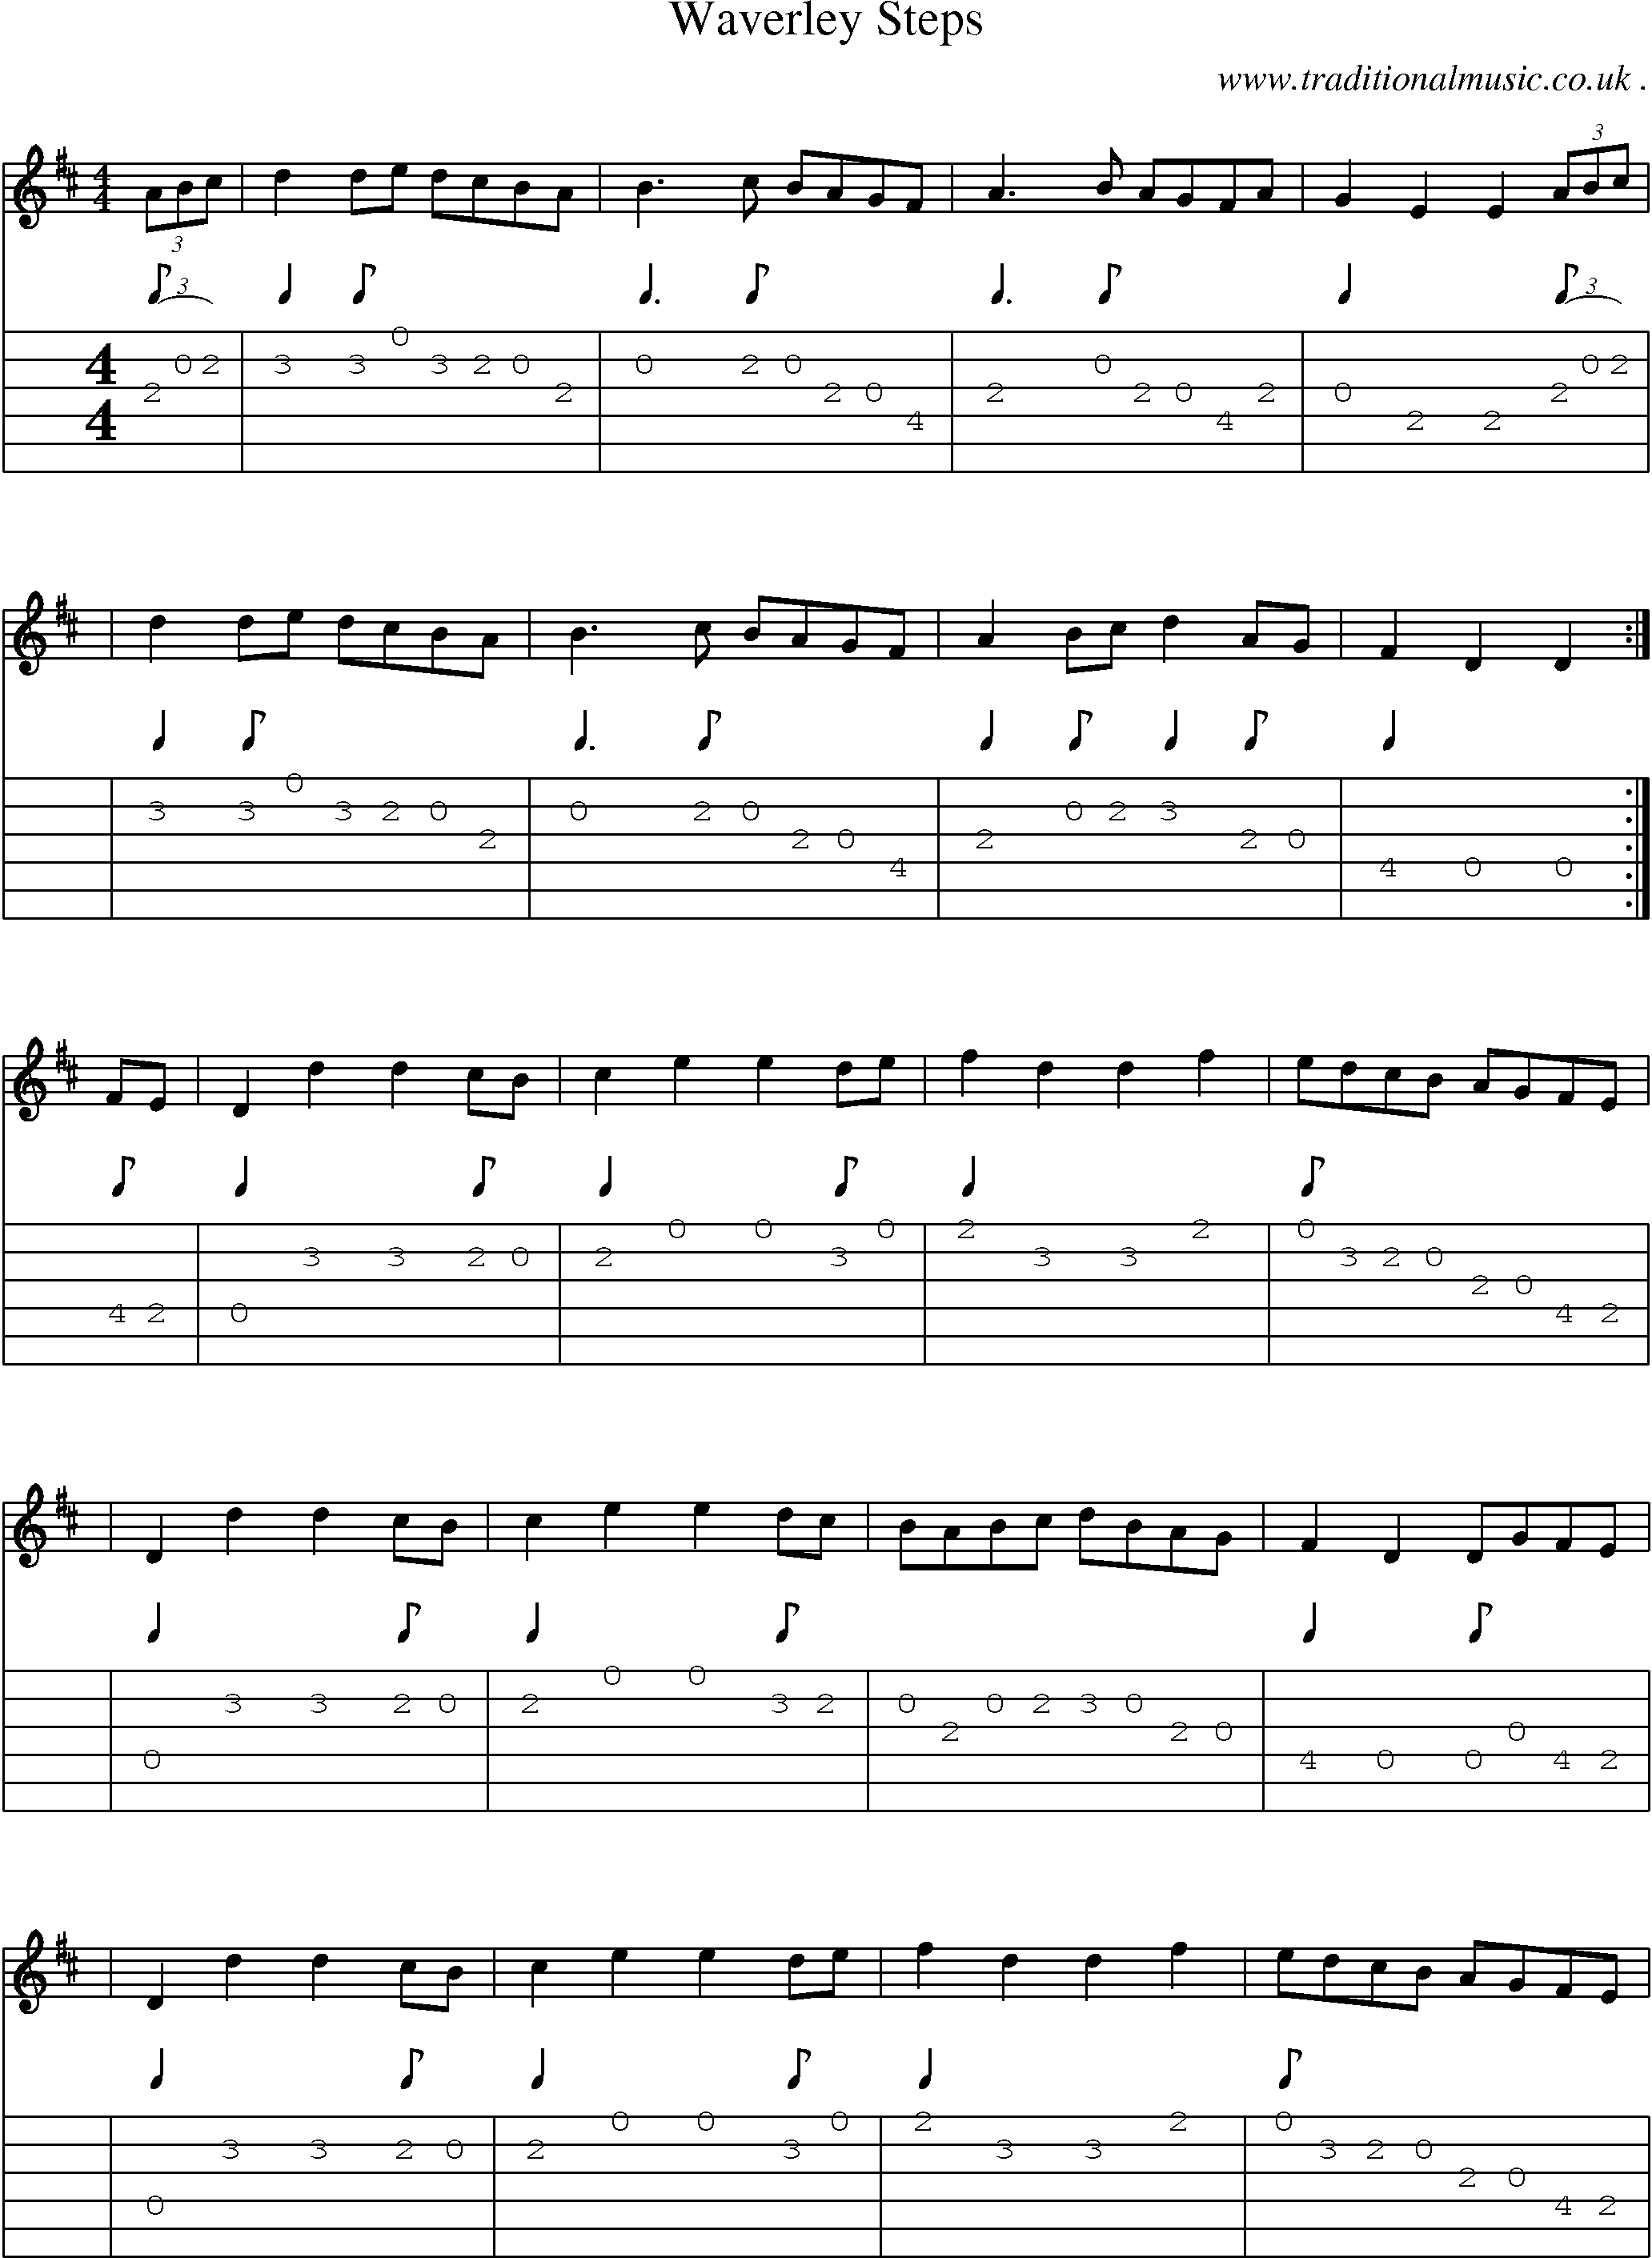 Sheet-music  score, Chords and Guitar Tabs for Waverley Steps